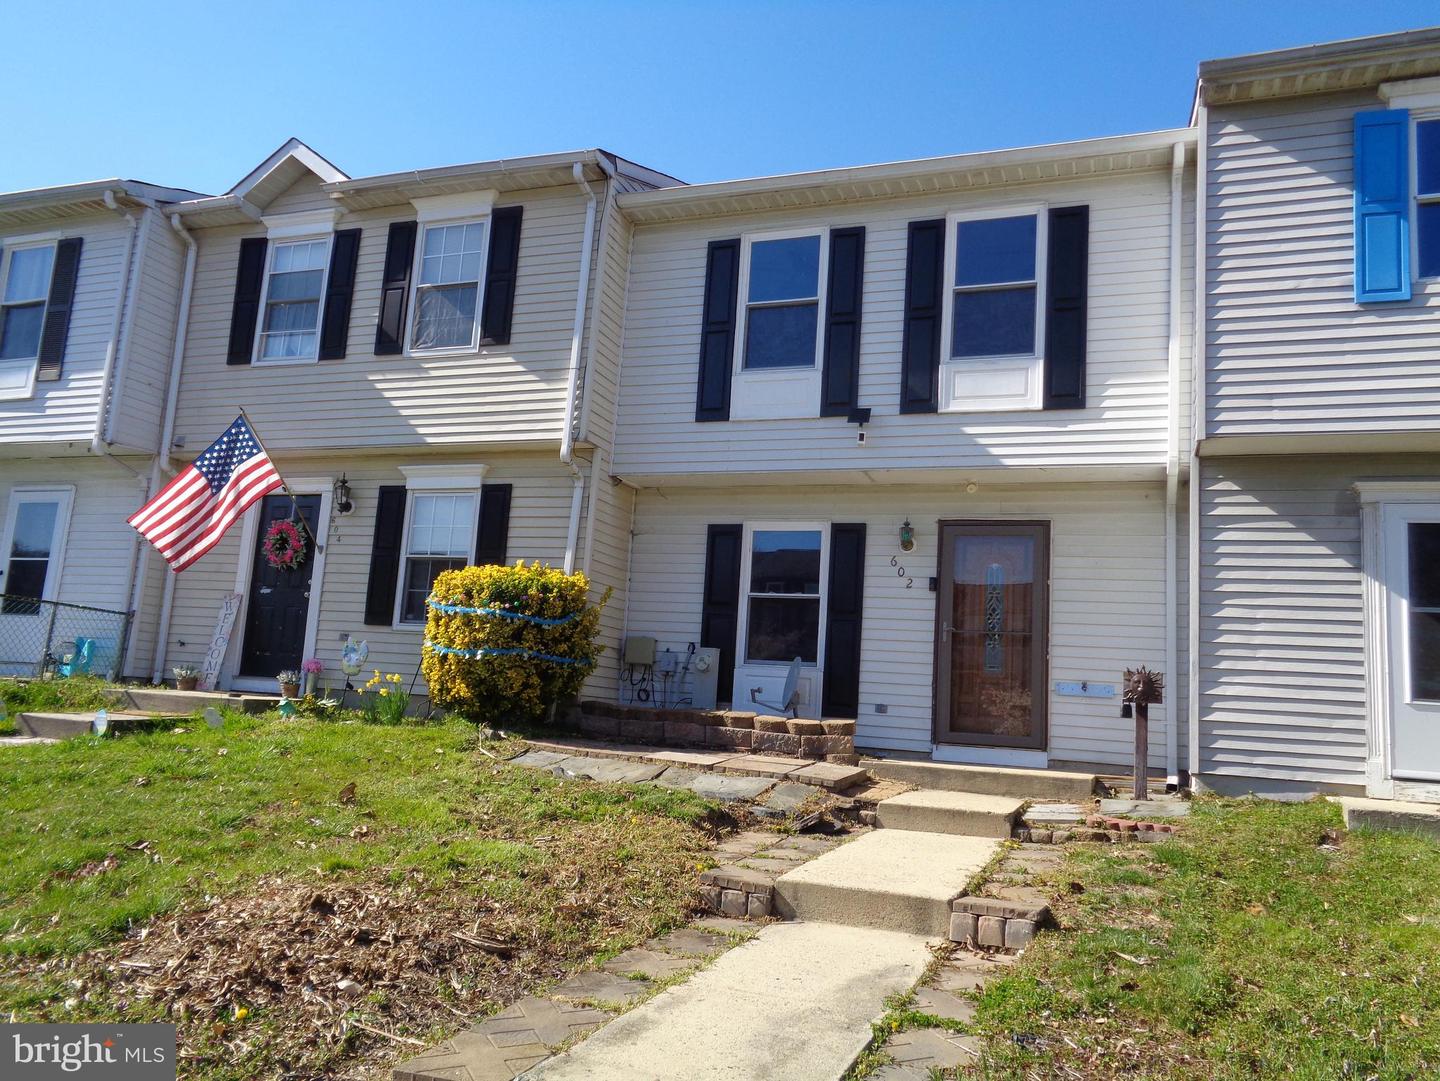 View Middle River, MD 21220 townhome